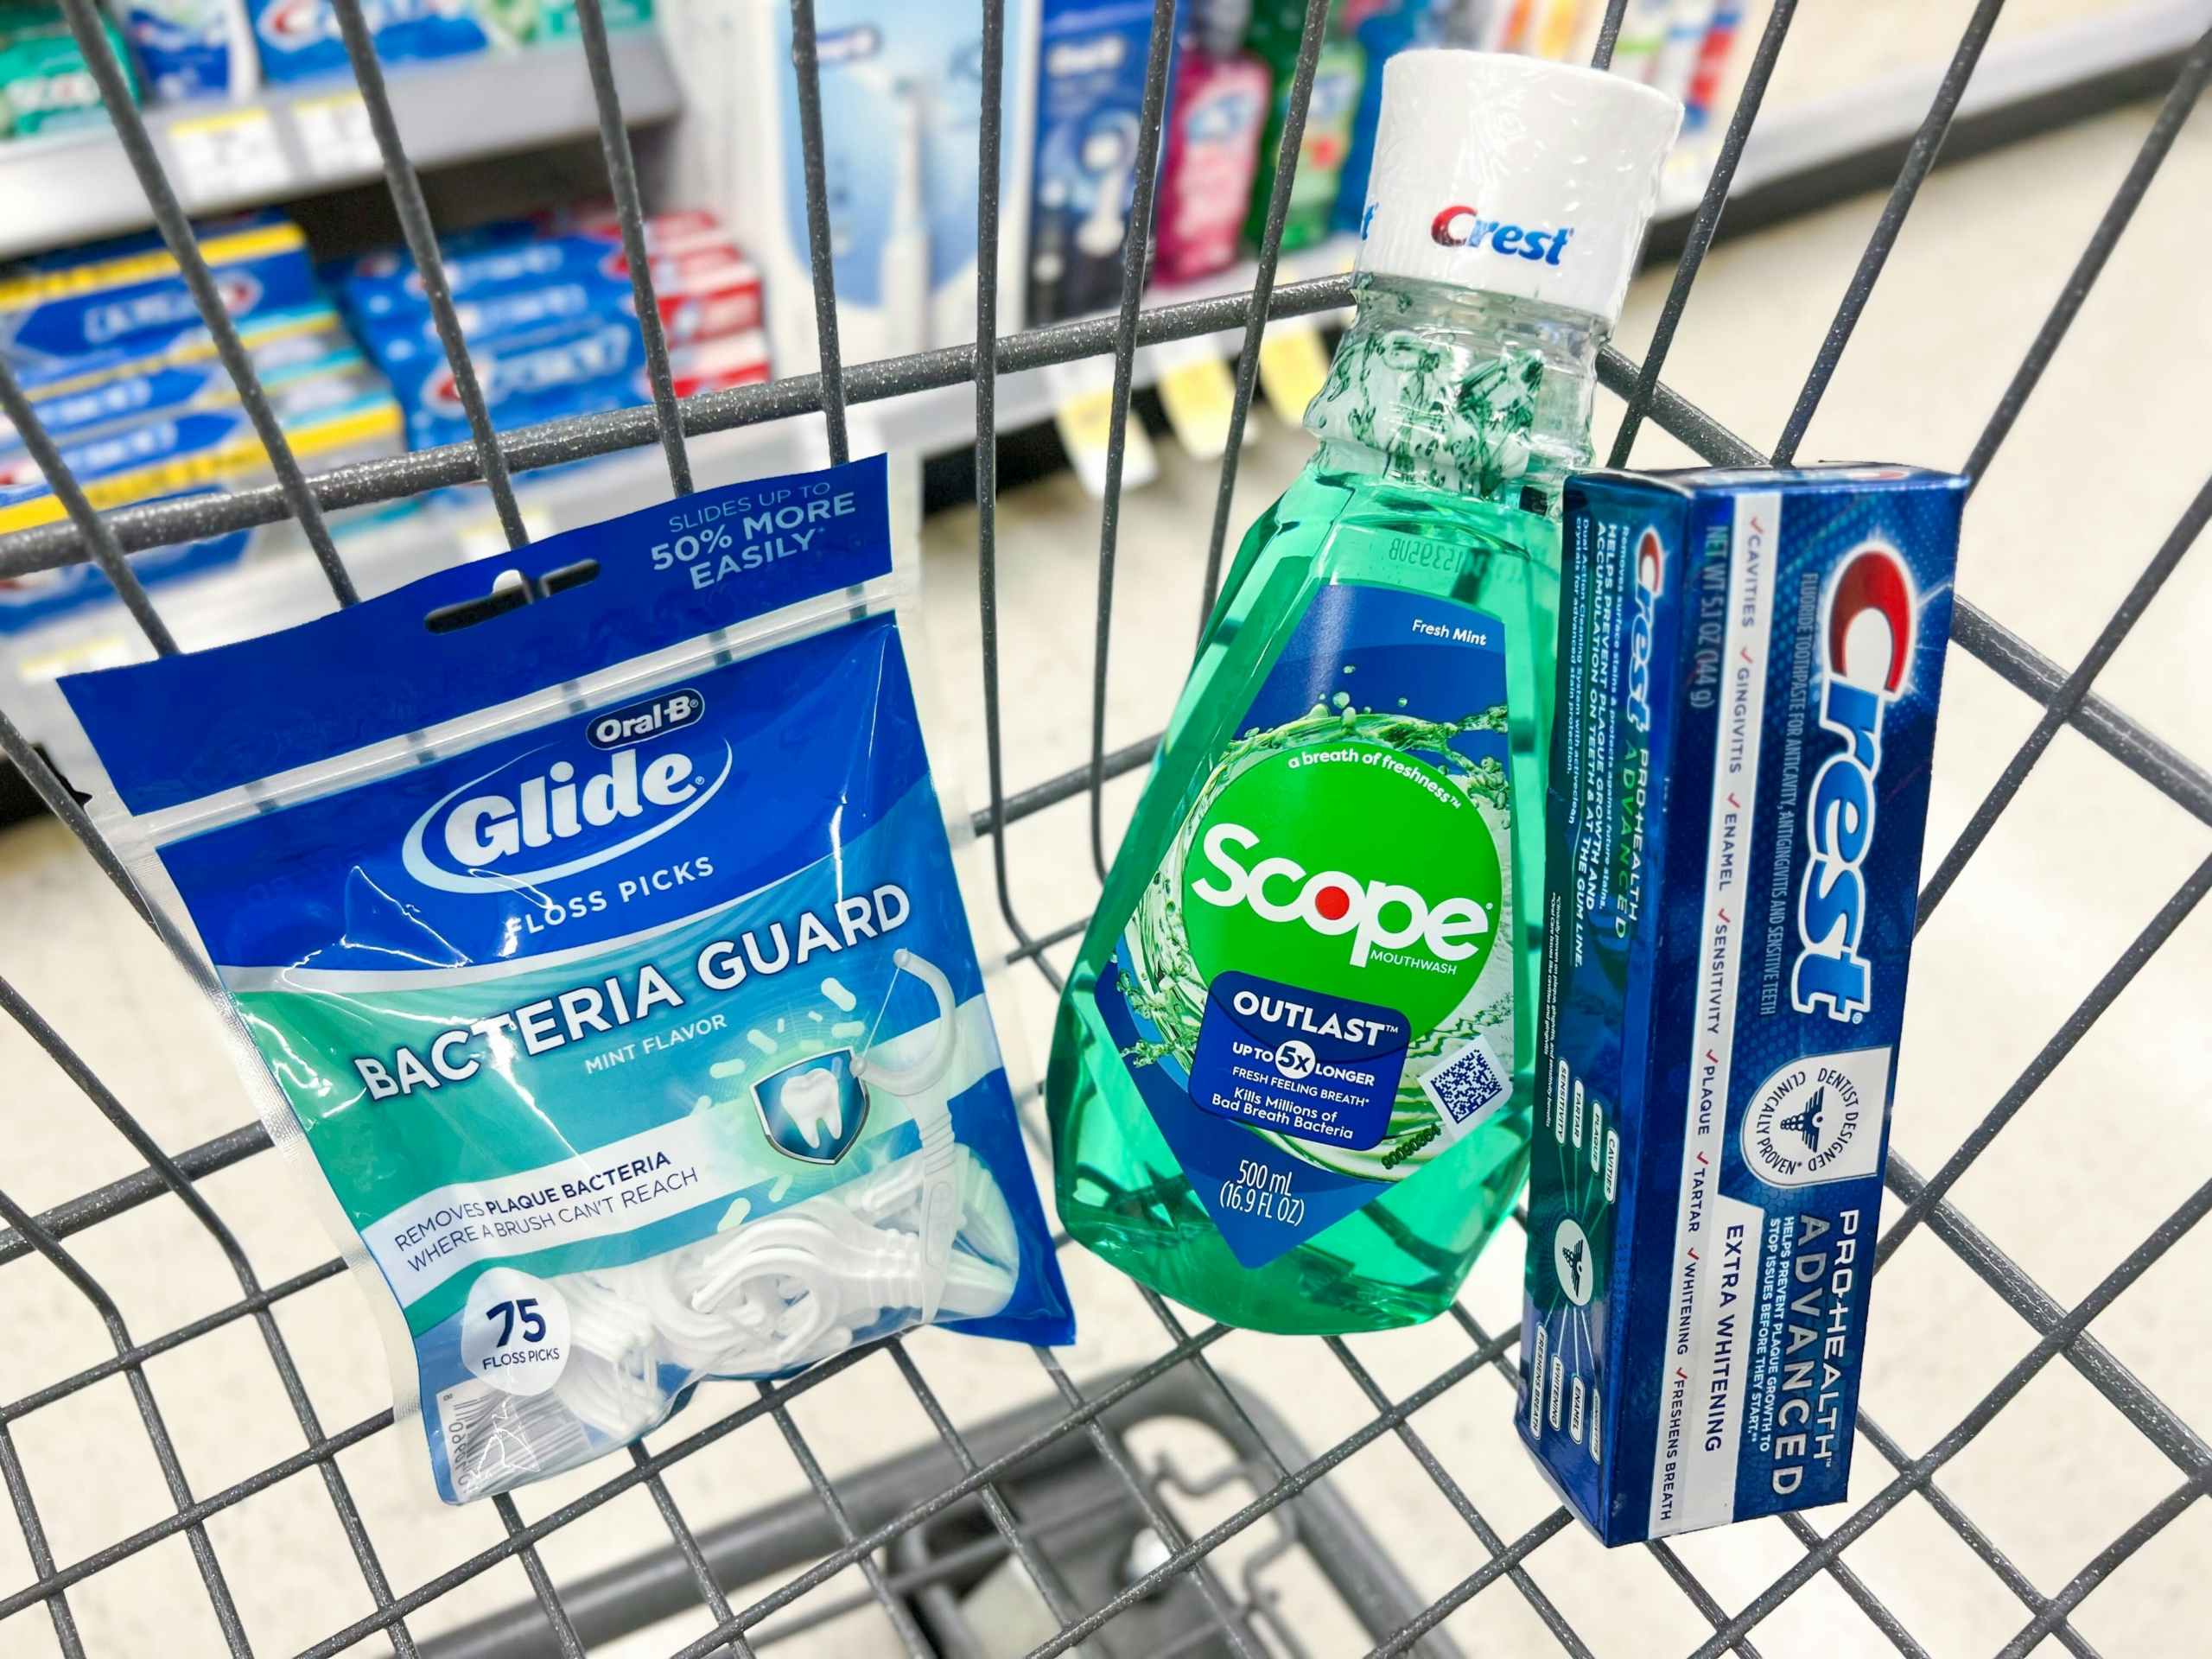 crest and oral-b products in shopping cart